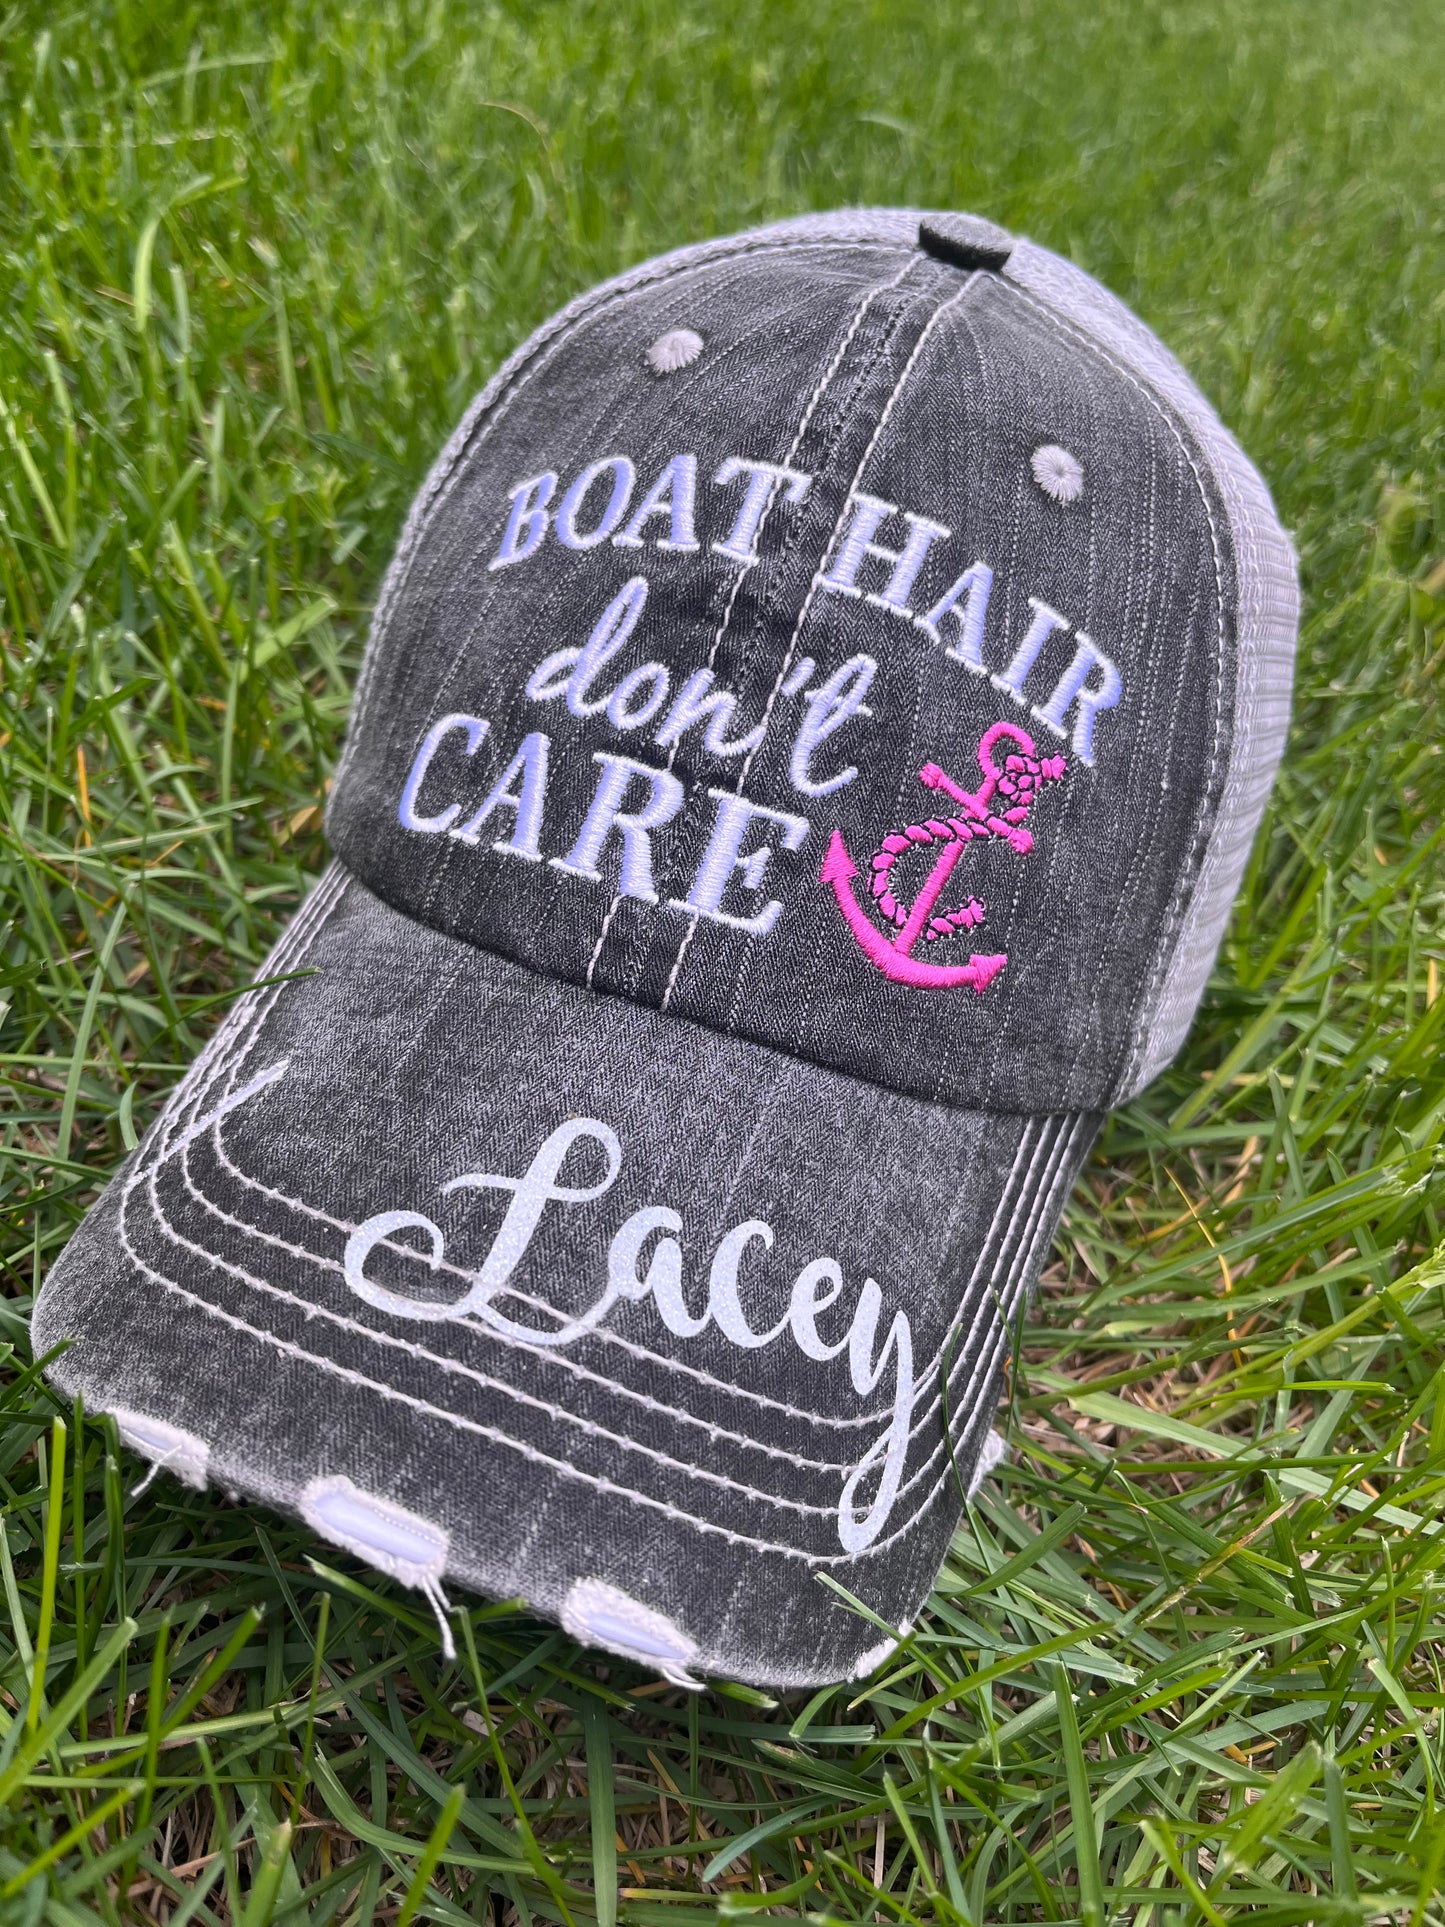 Hats Beach hair dont care Embroidered teal or pink flip flops distressed trucker cap Womens Sandals - Stacy's Pink Martini Boutique